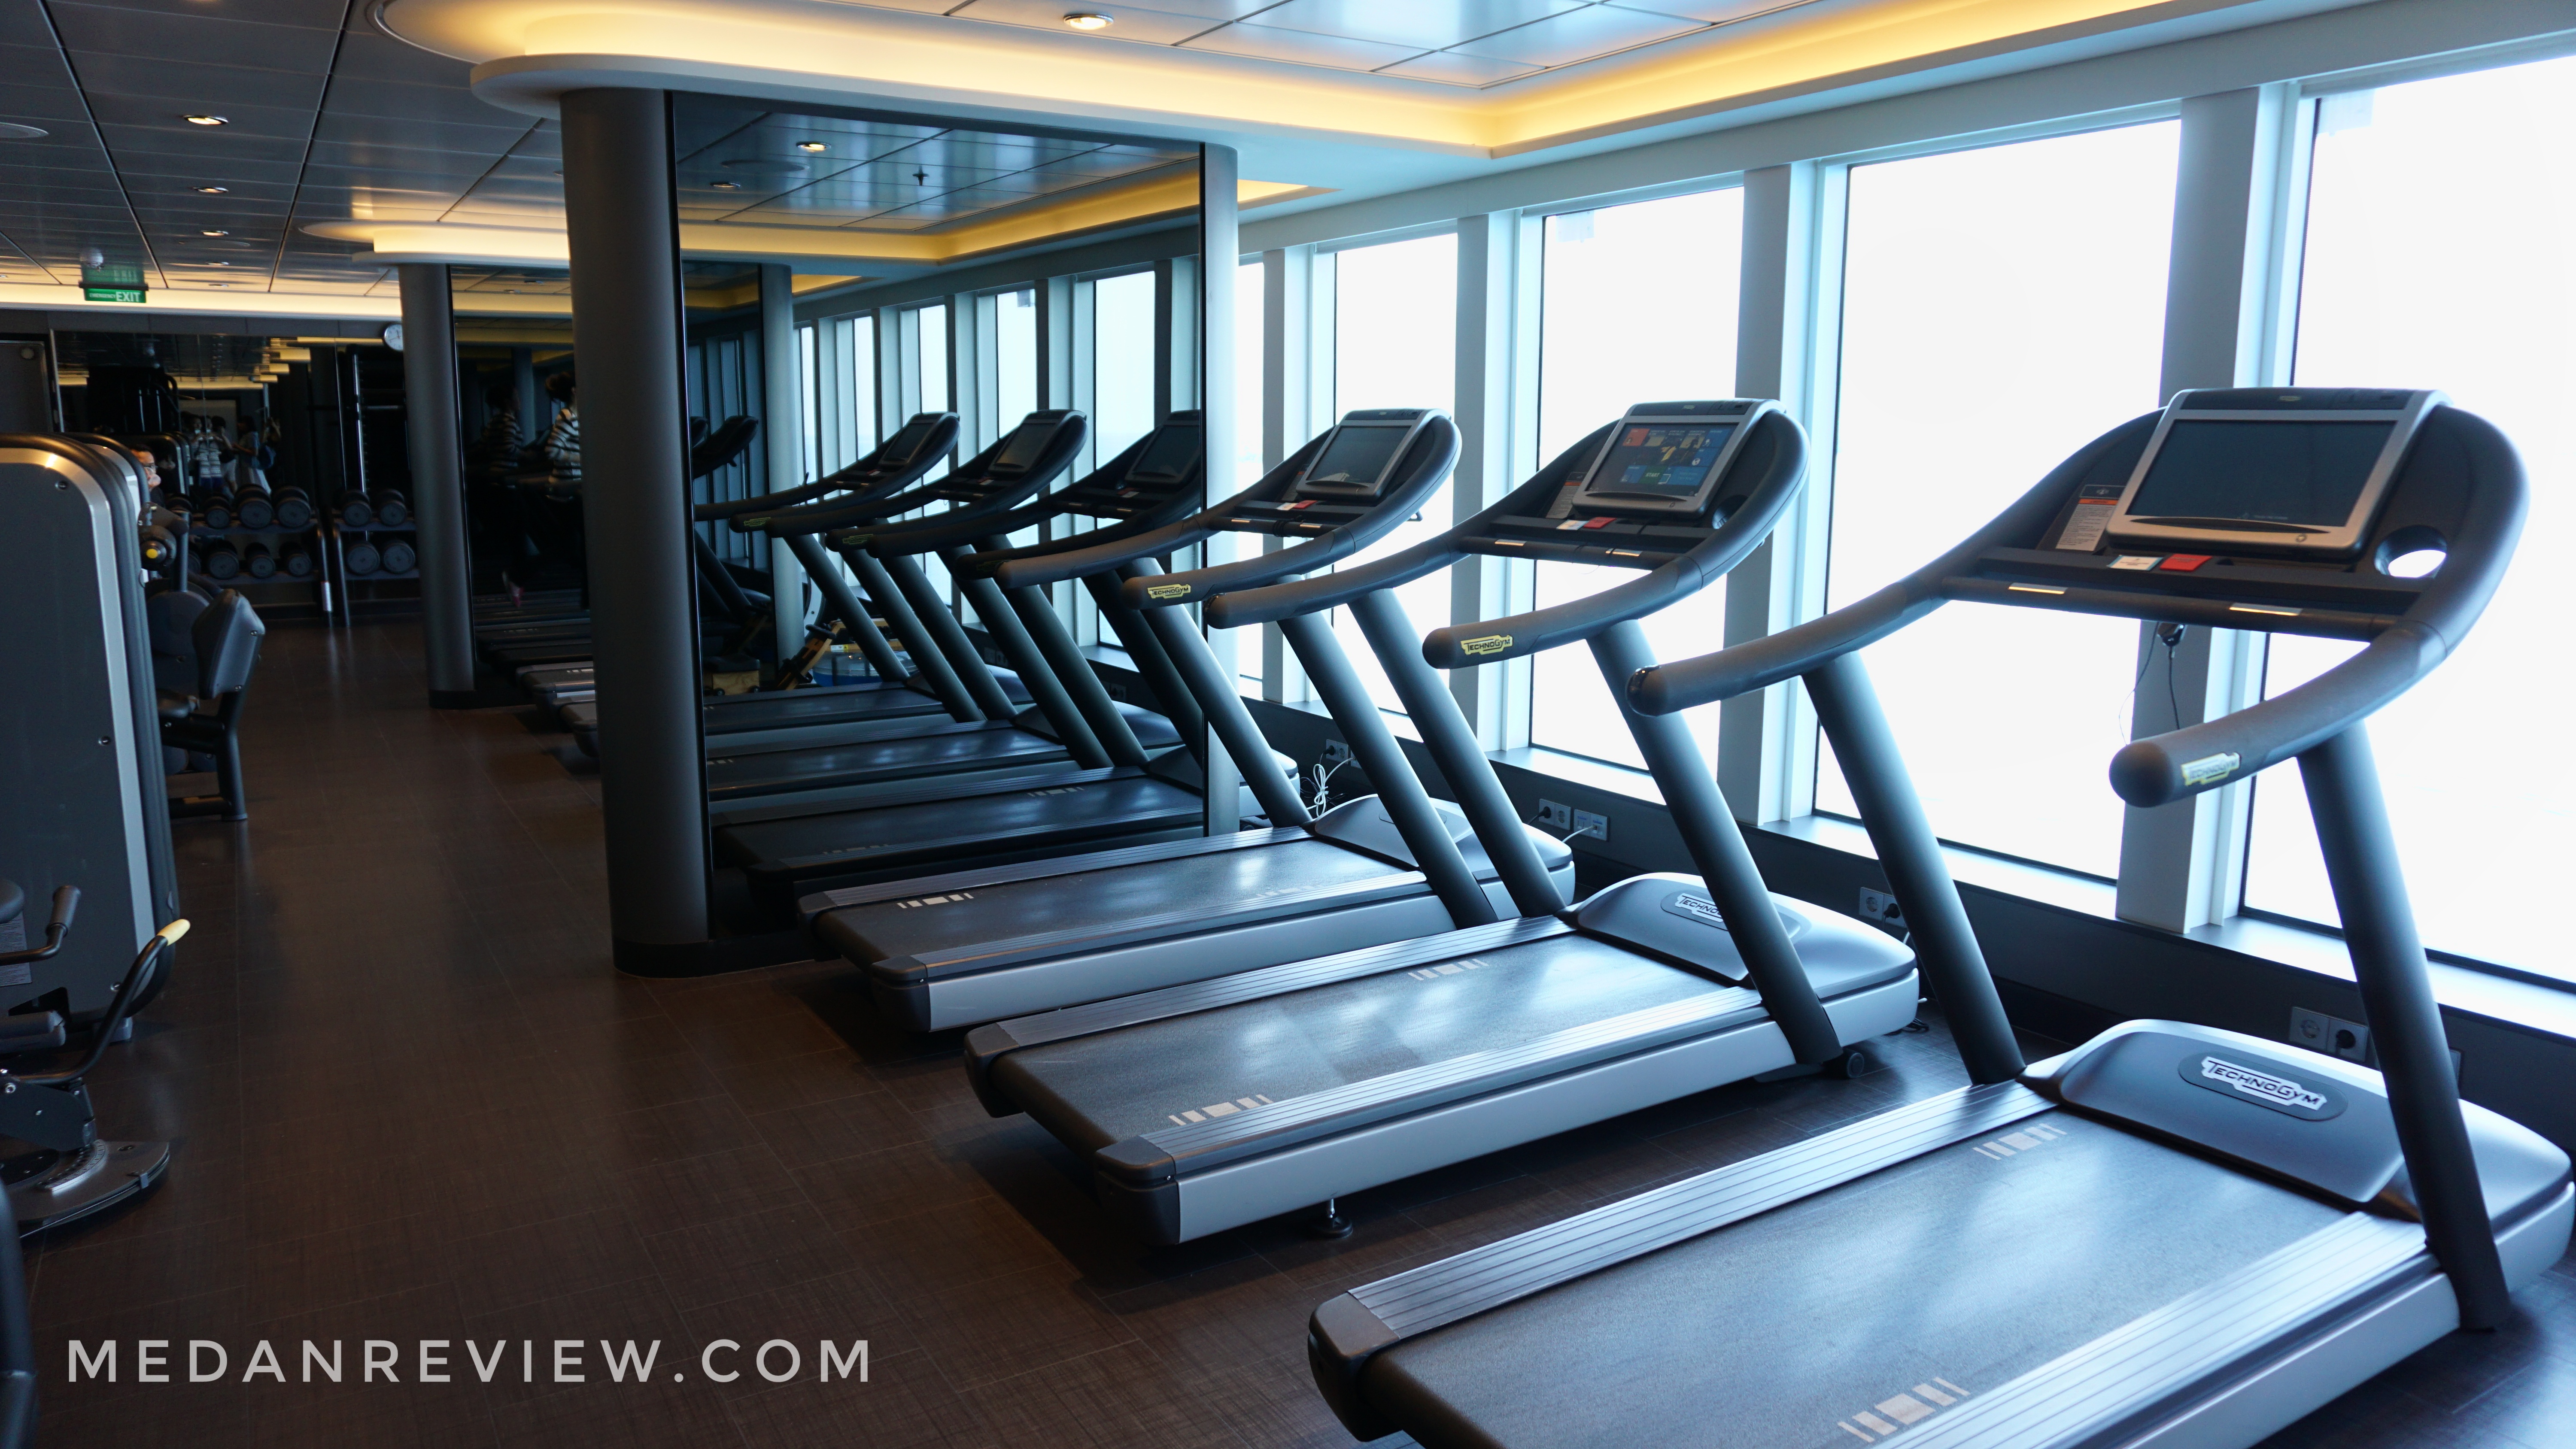 Crystal Life Fitness Genting Dream Cruise